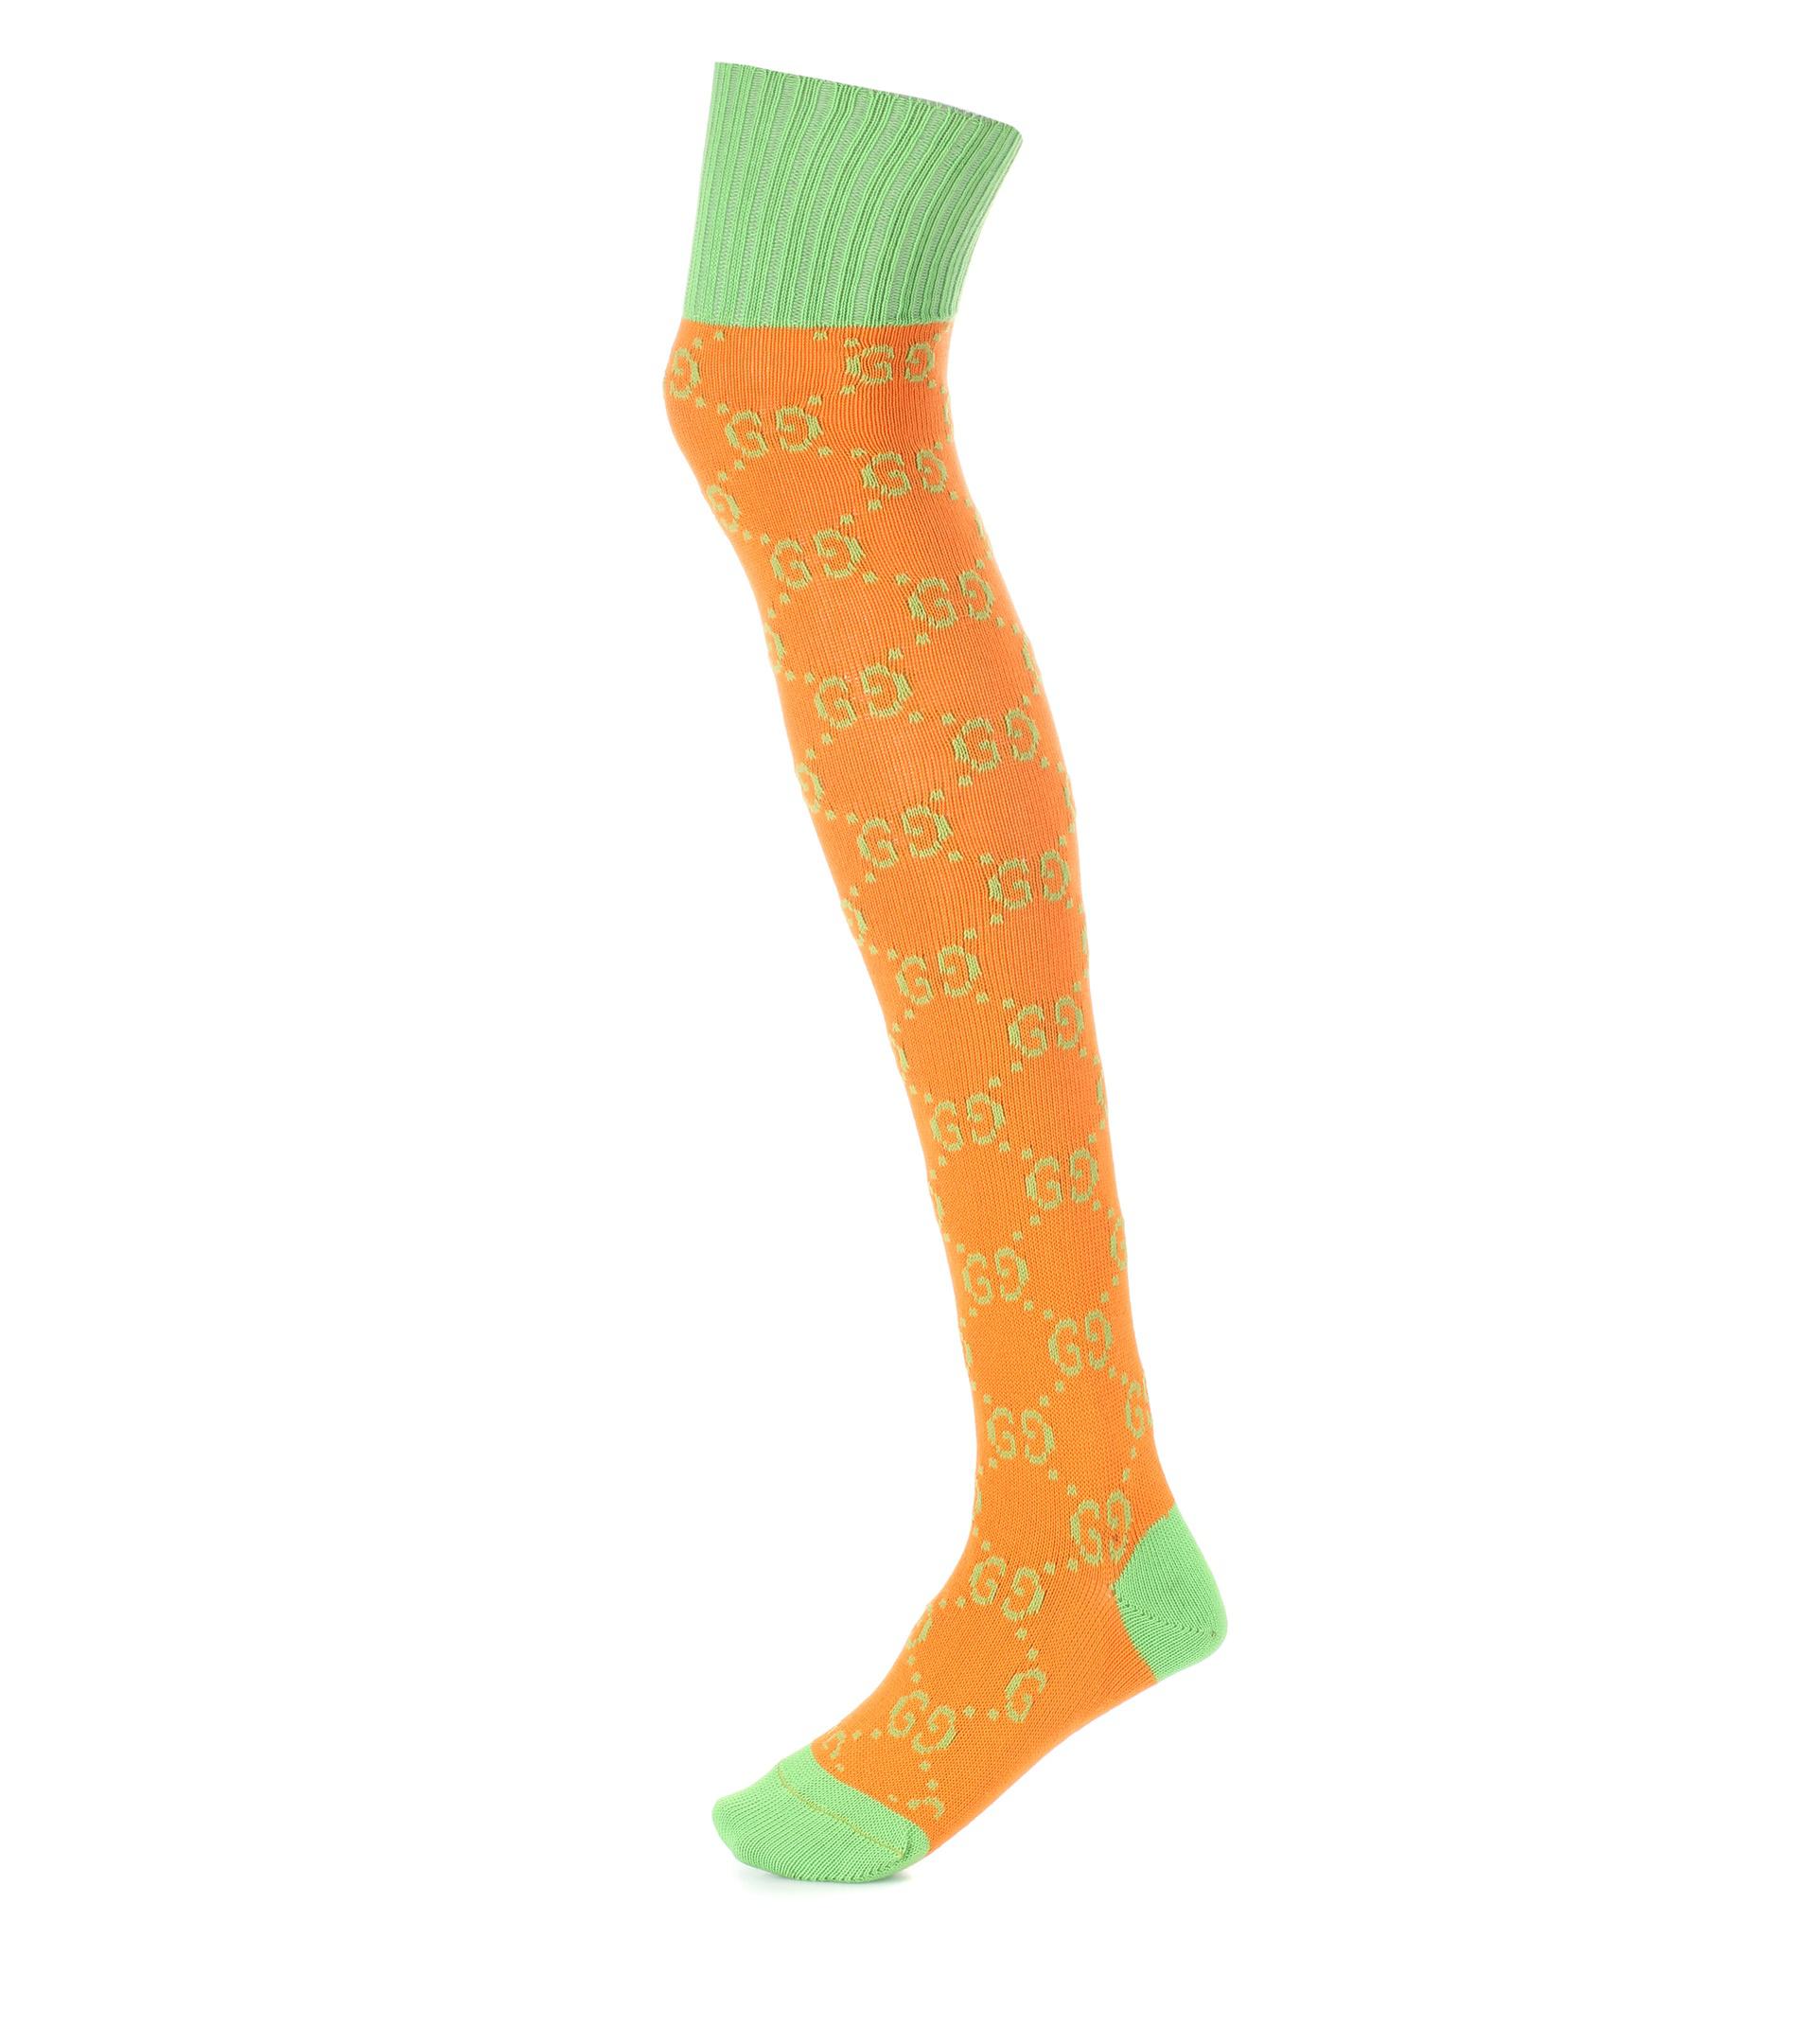 Lyst - Gucci Knitted Cotton-blend Socks in Orange